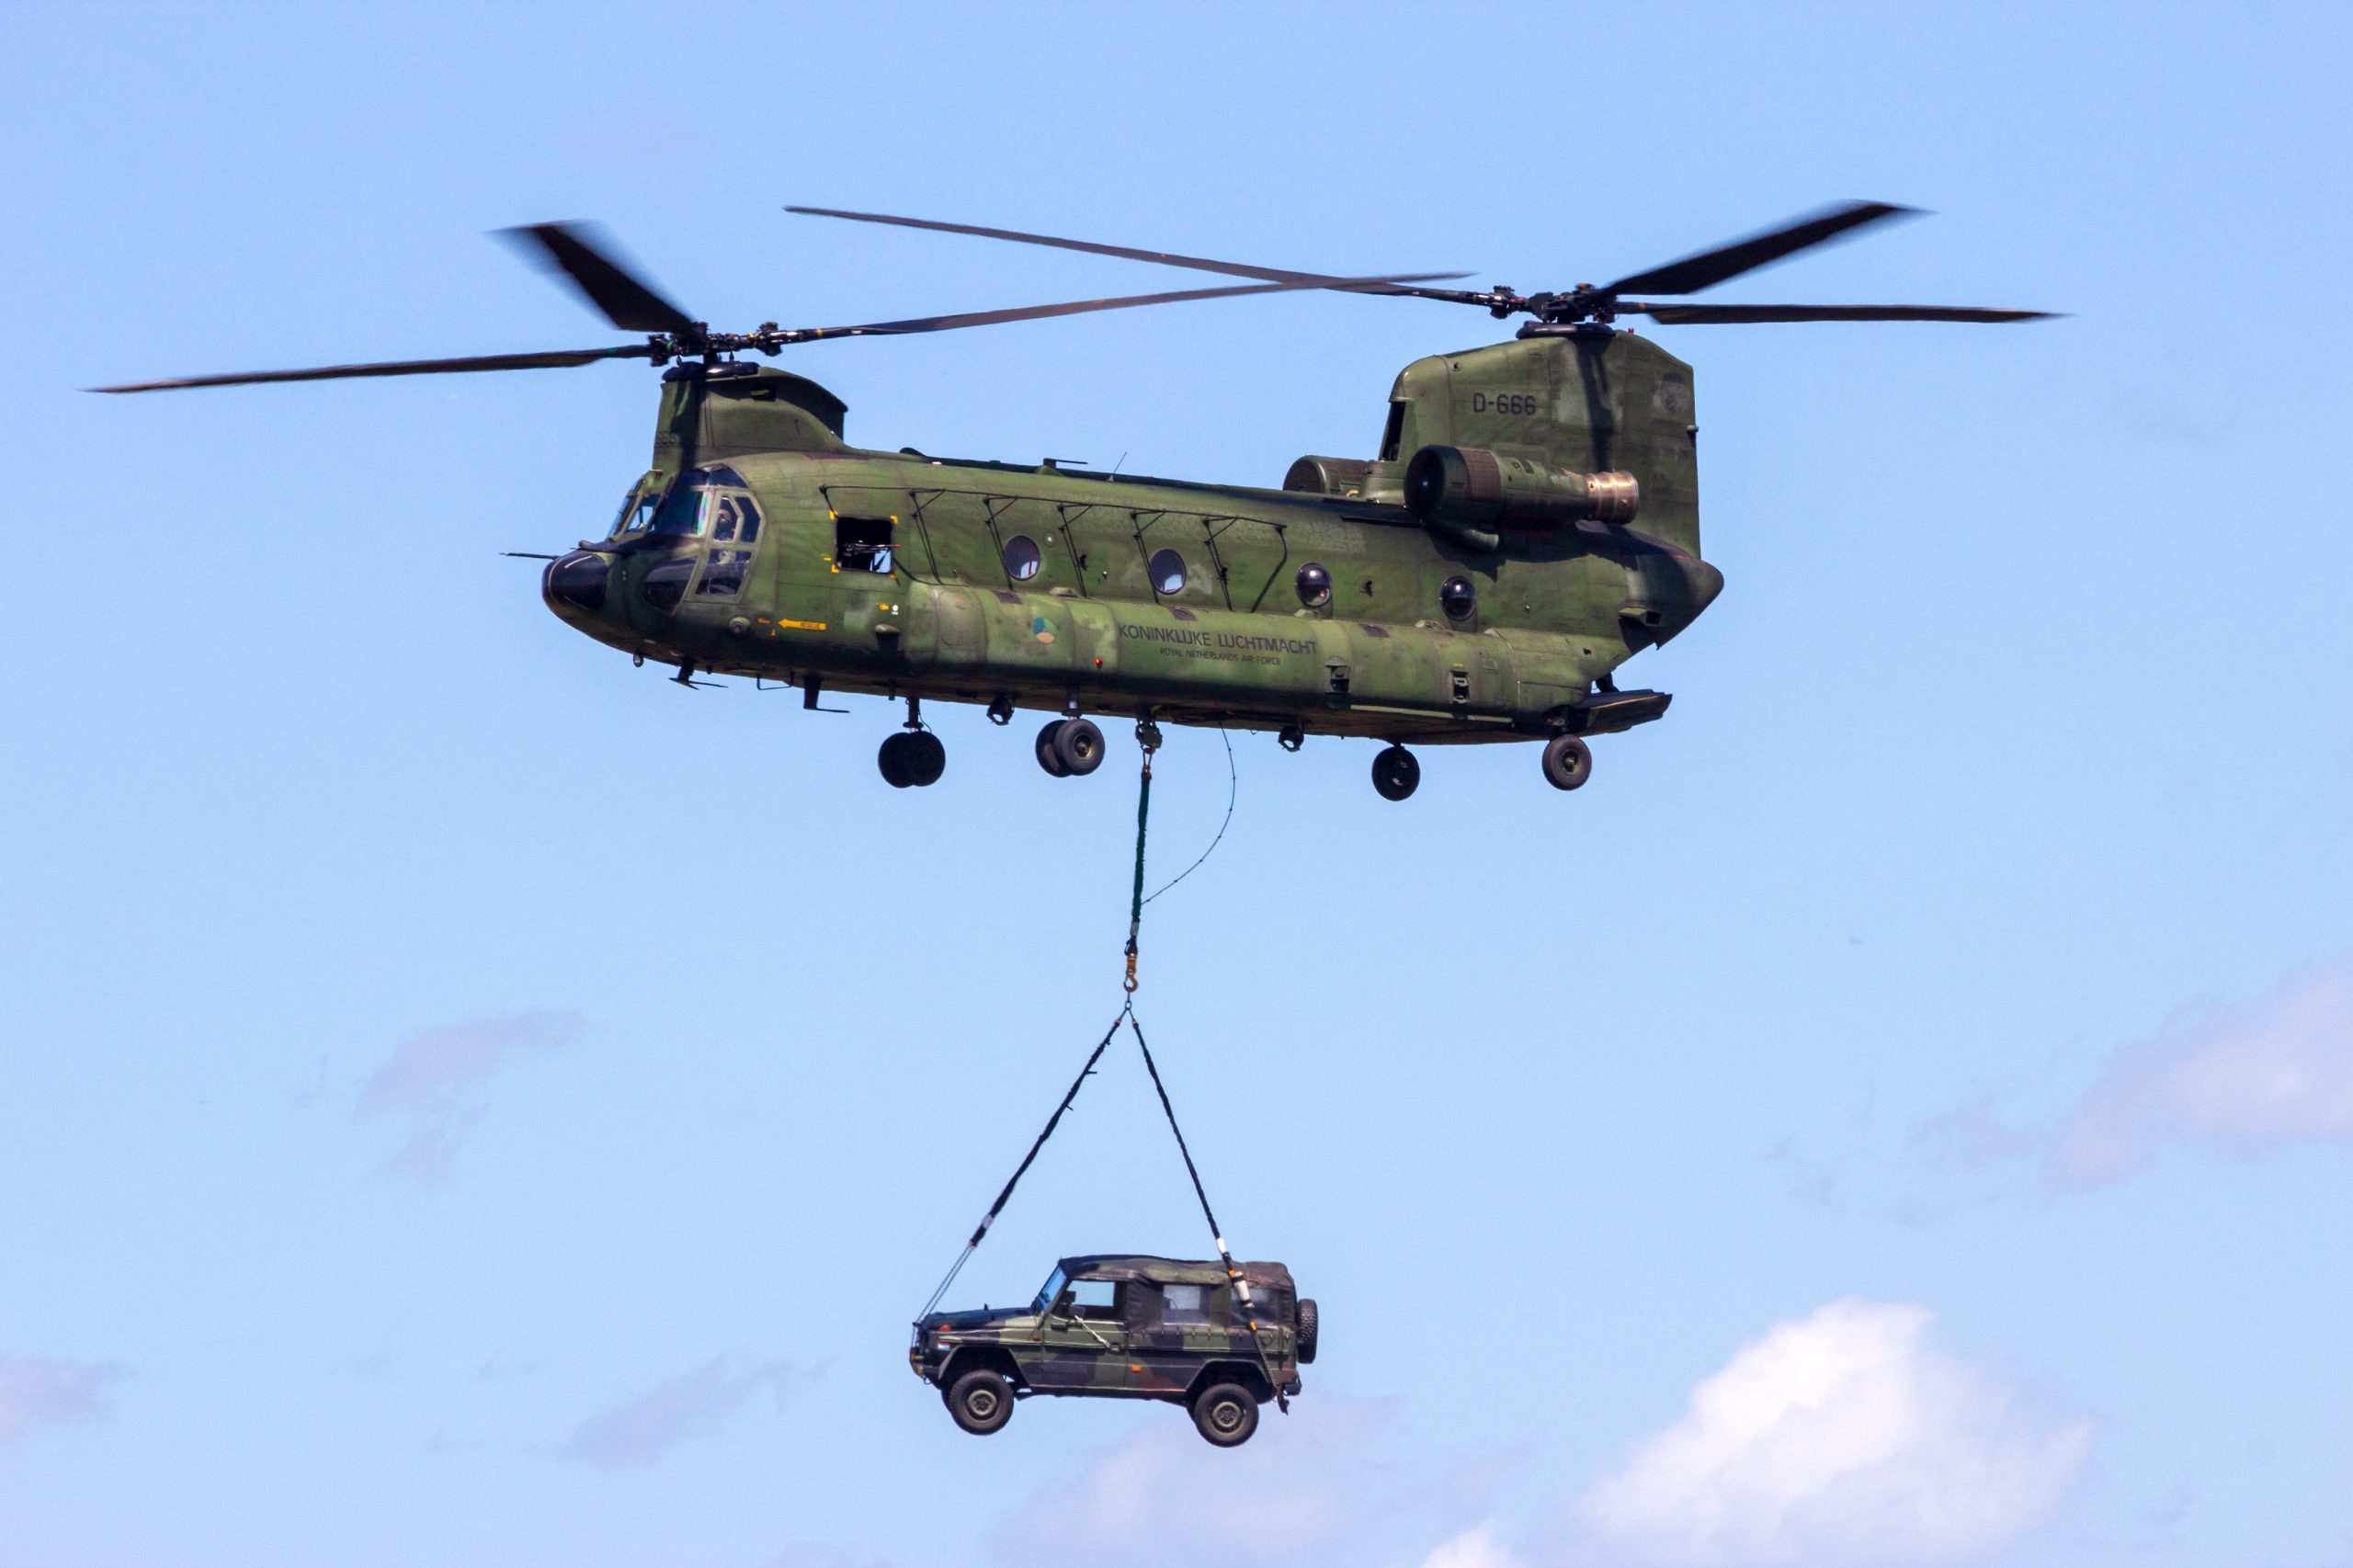 Aechelon Technology Inc. awarded second Royal Netherlands Air Force (RNLAF) CH-47F Chinook Image Generators and Databases in a Transportable Flight Proficiency Simulator (TFPS)